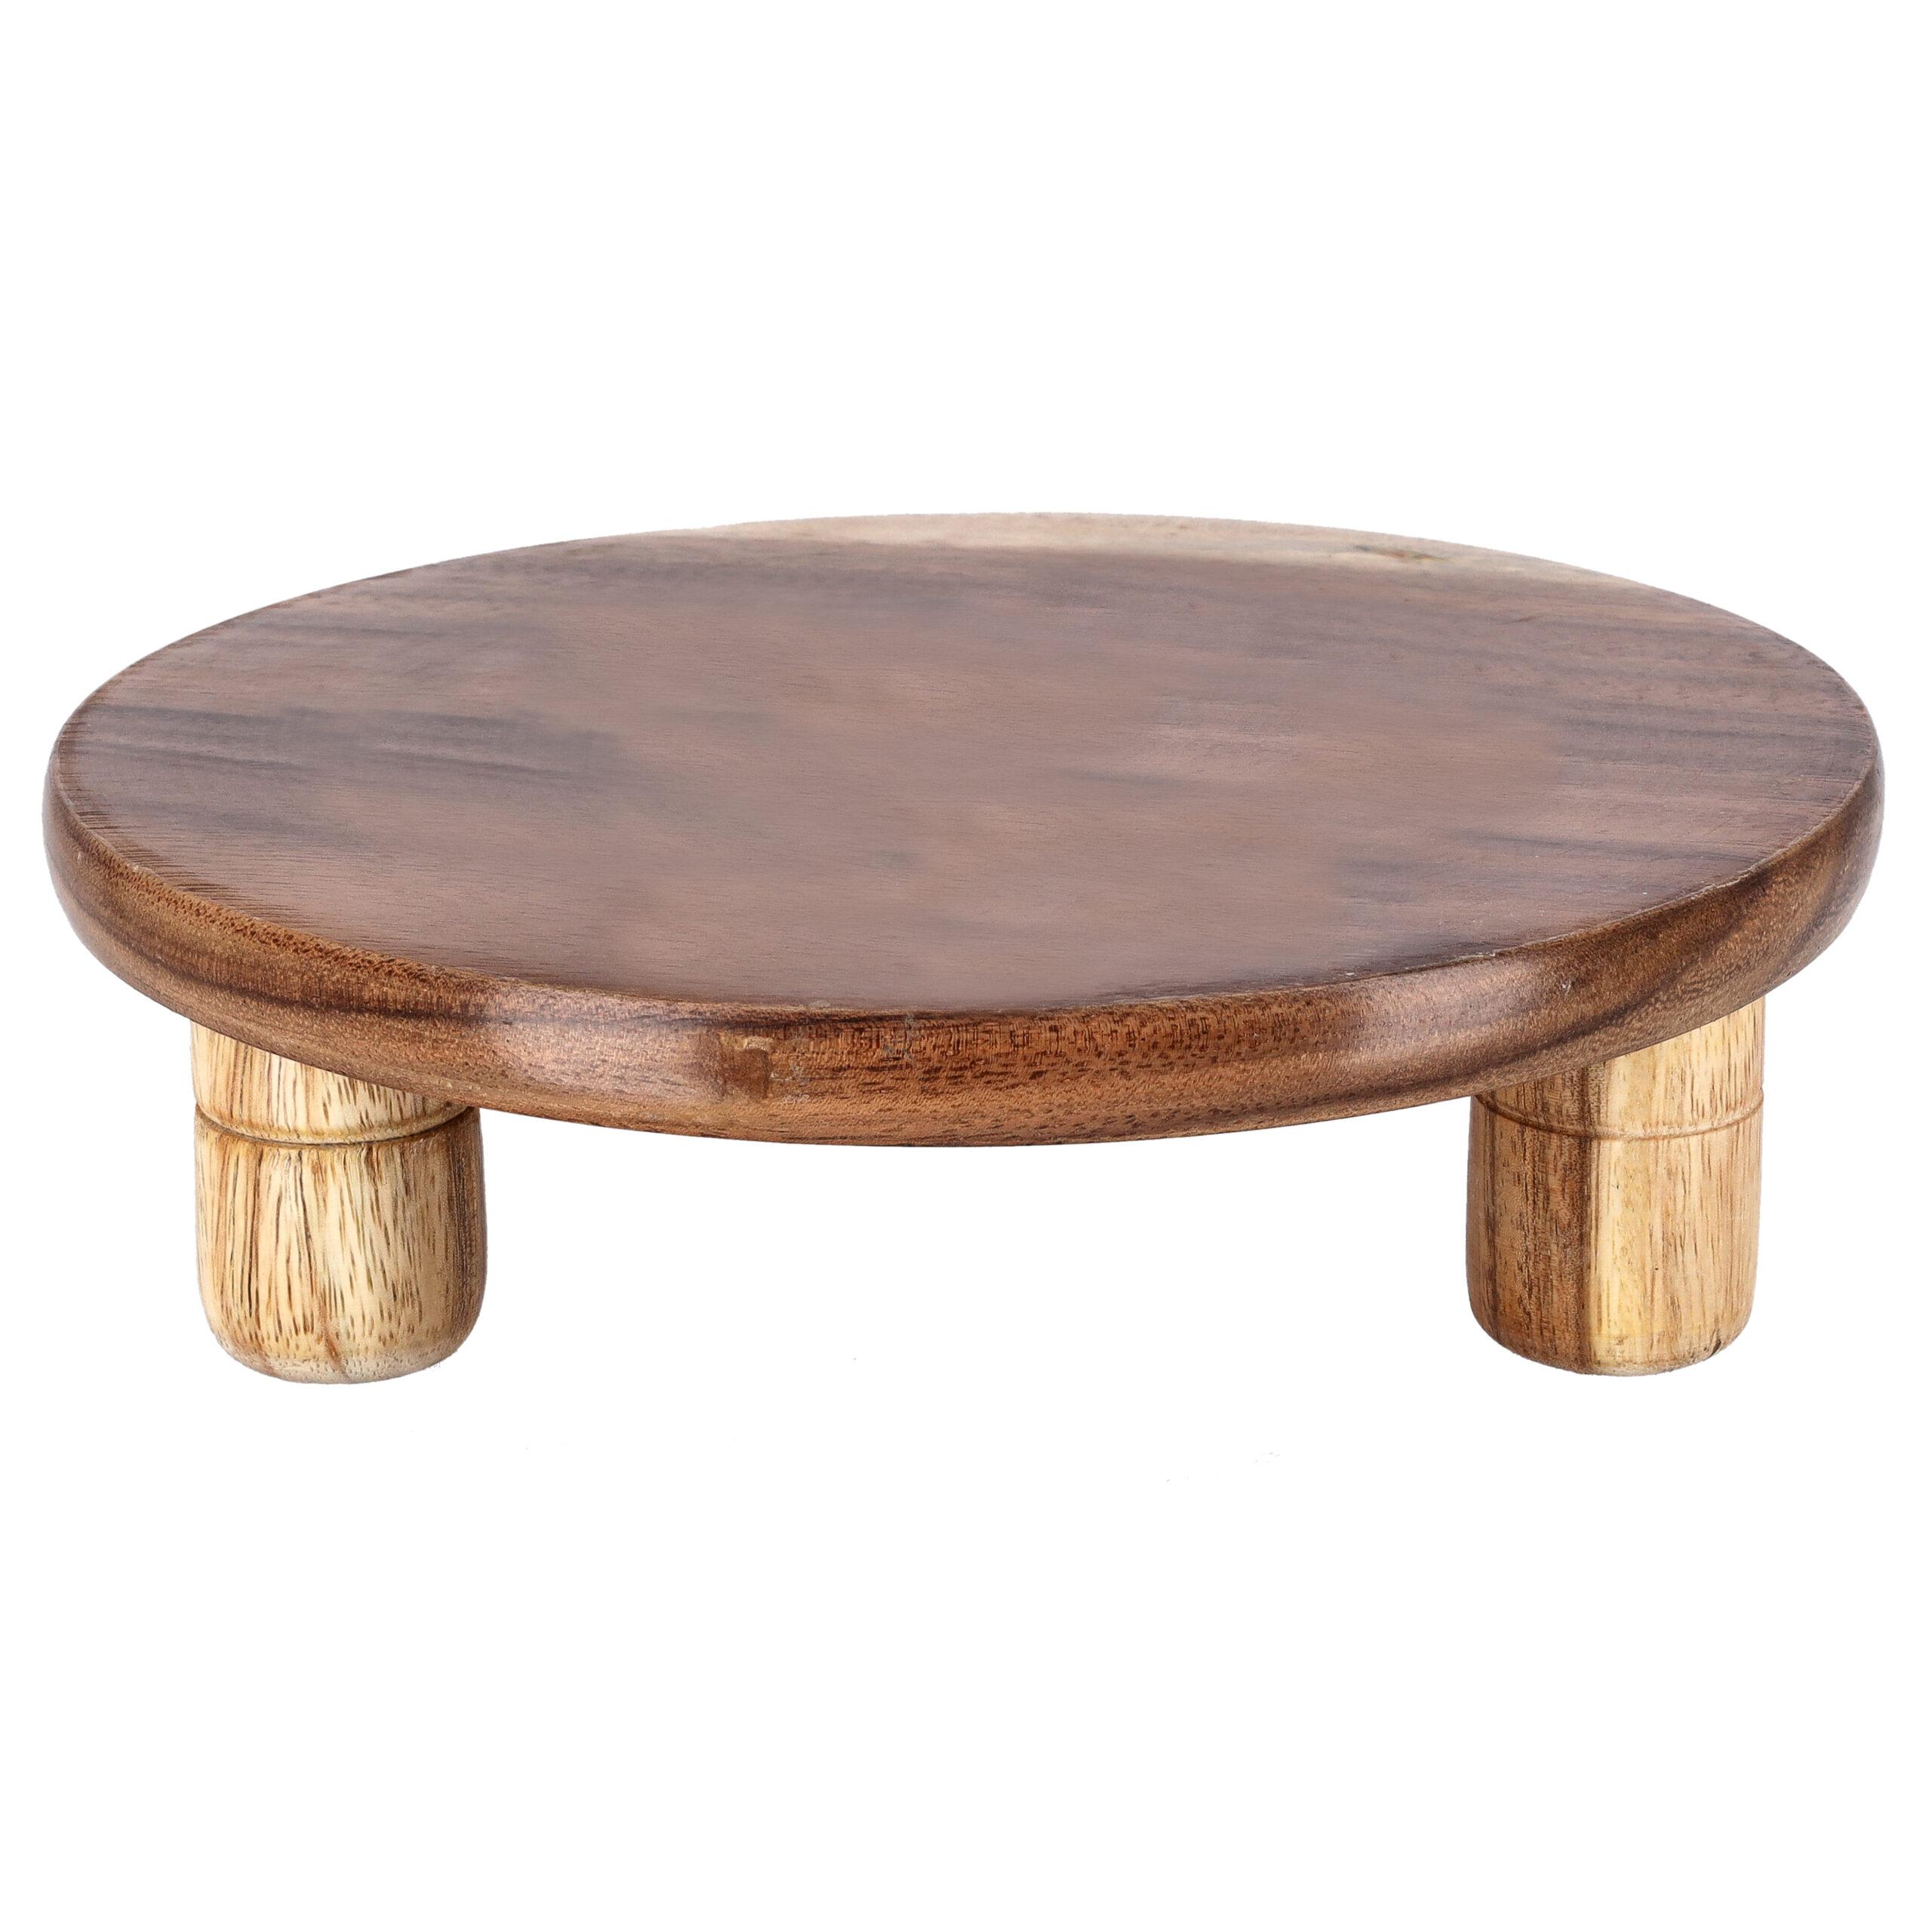 Royalford 11" Wooden Chappathi Table1X12